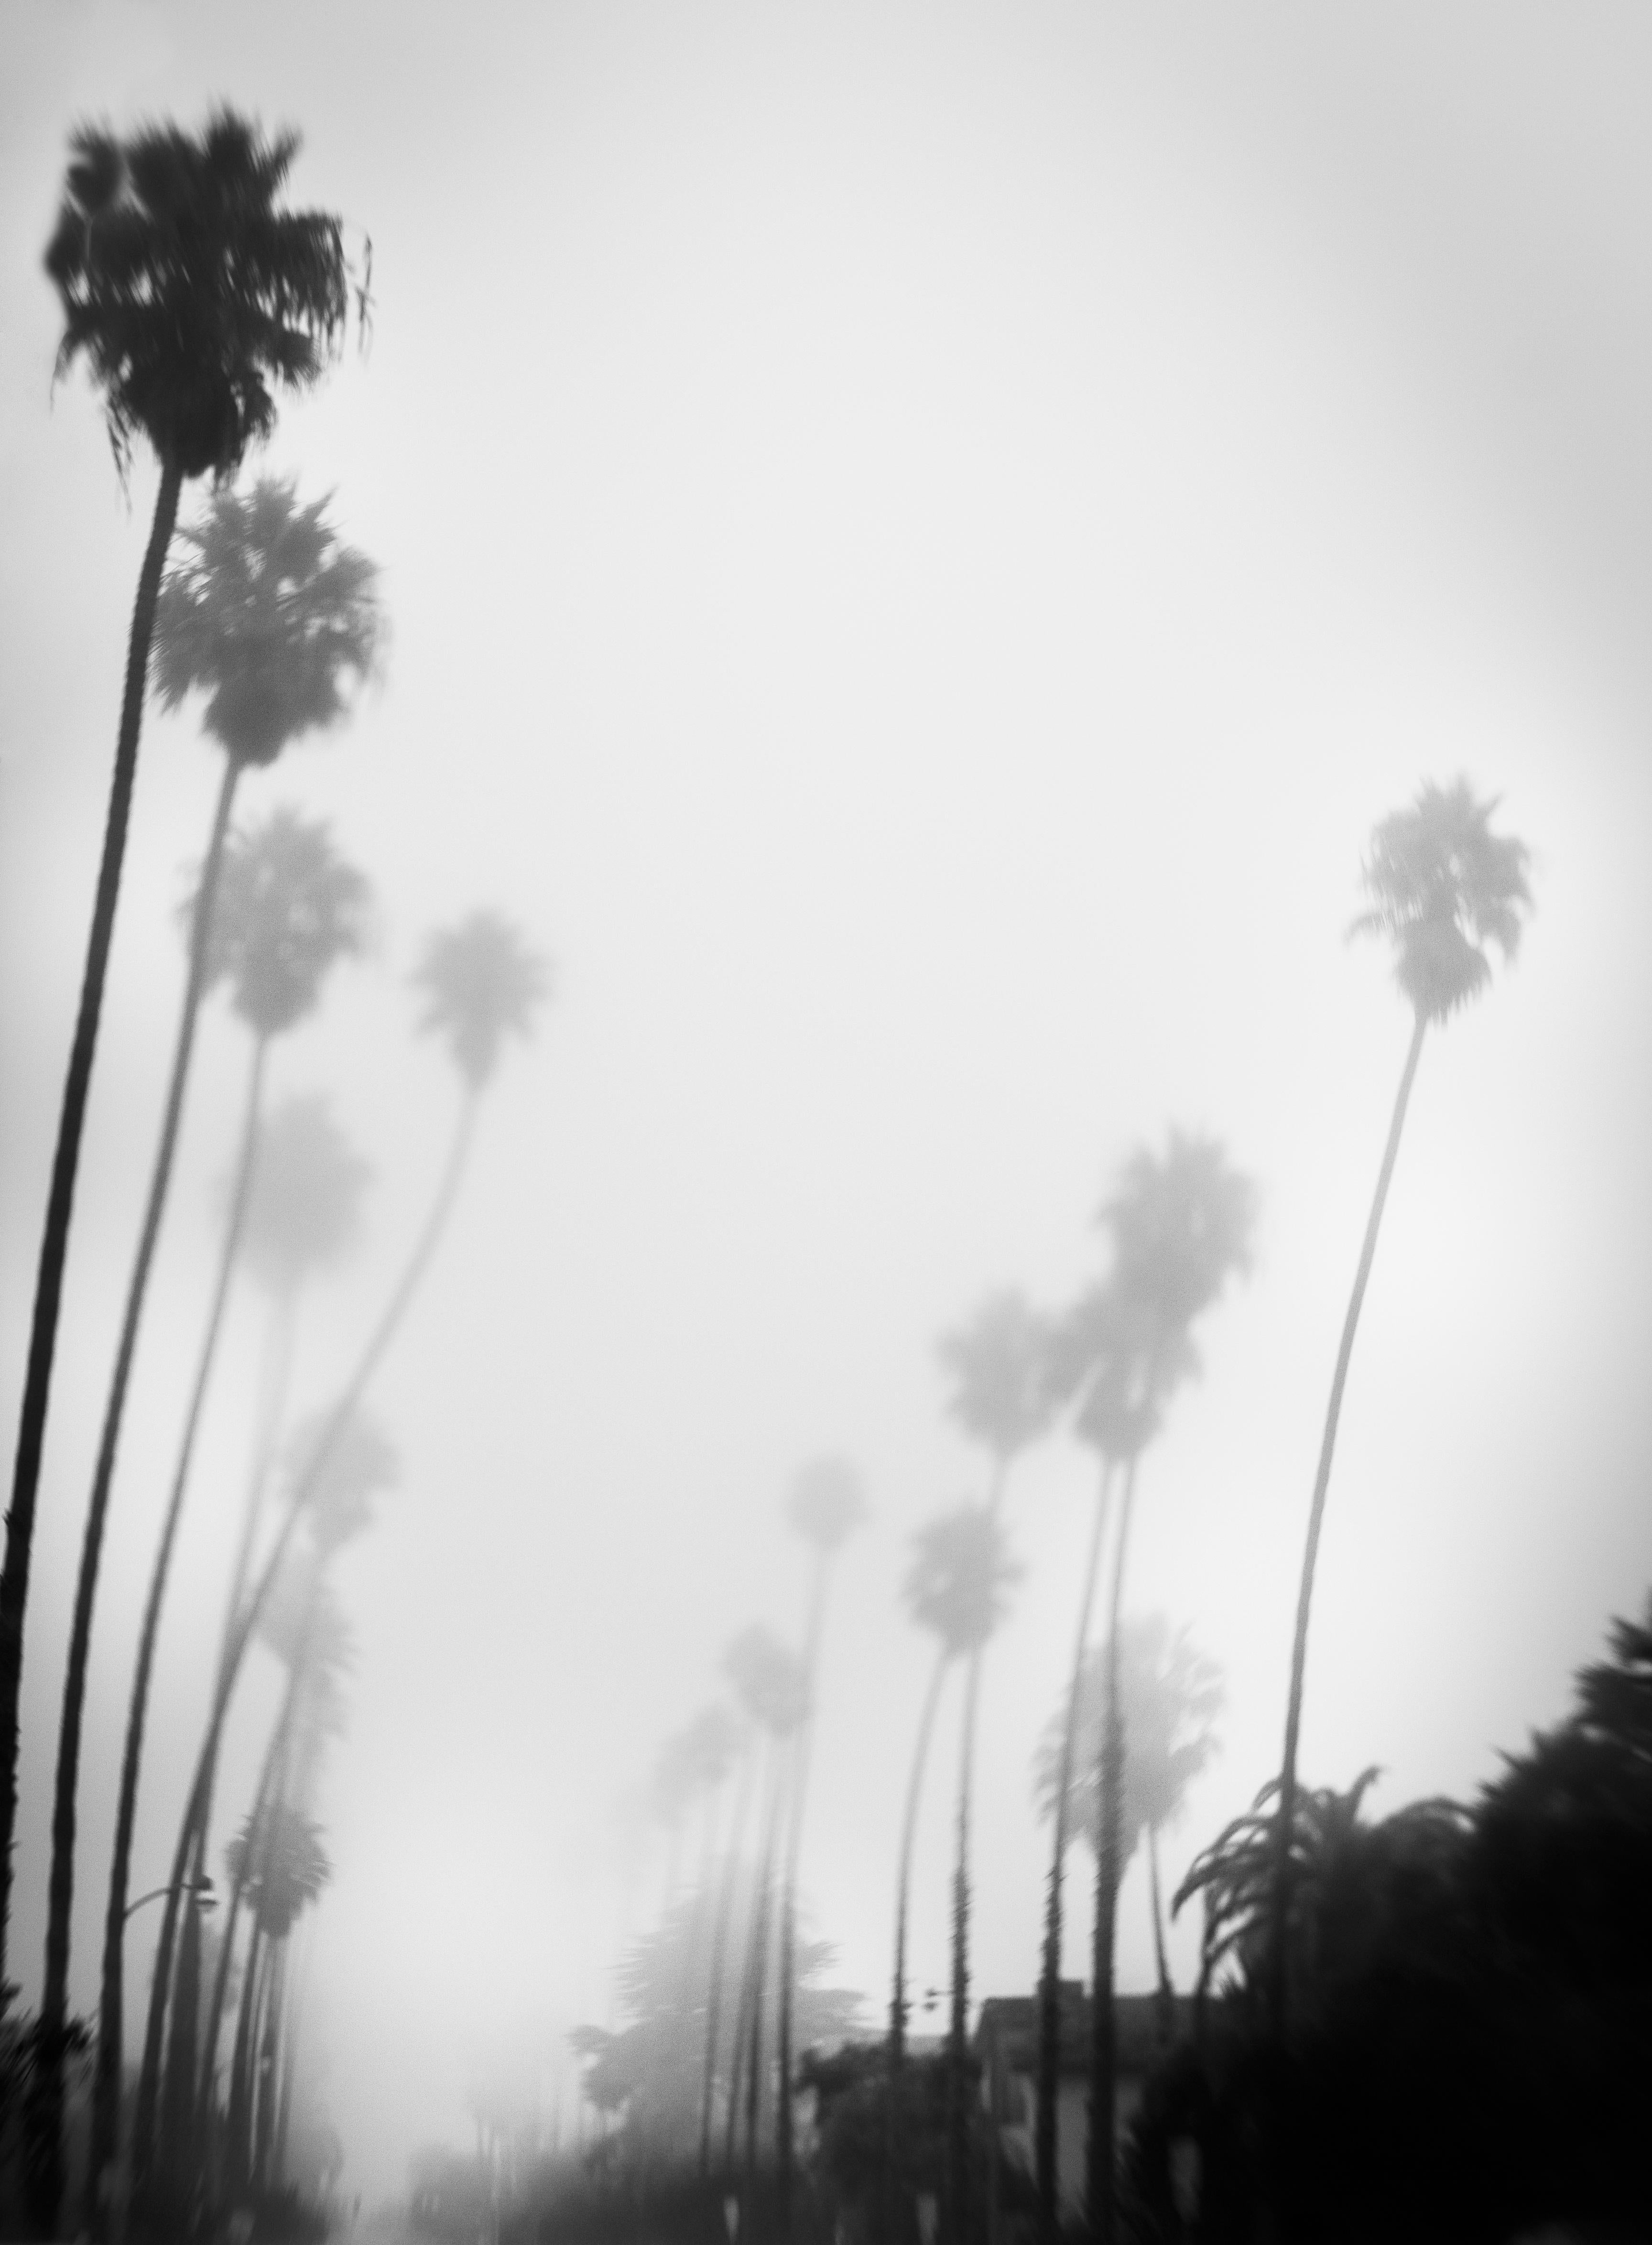 Sarah Hadley Black and White Photograph - Palm Trees in Mist, Los Angeles